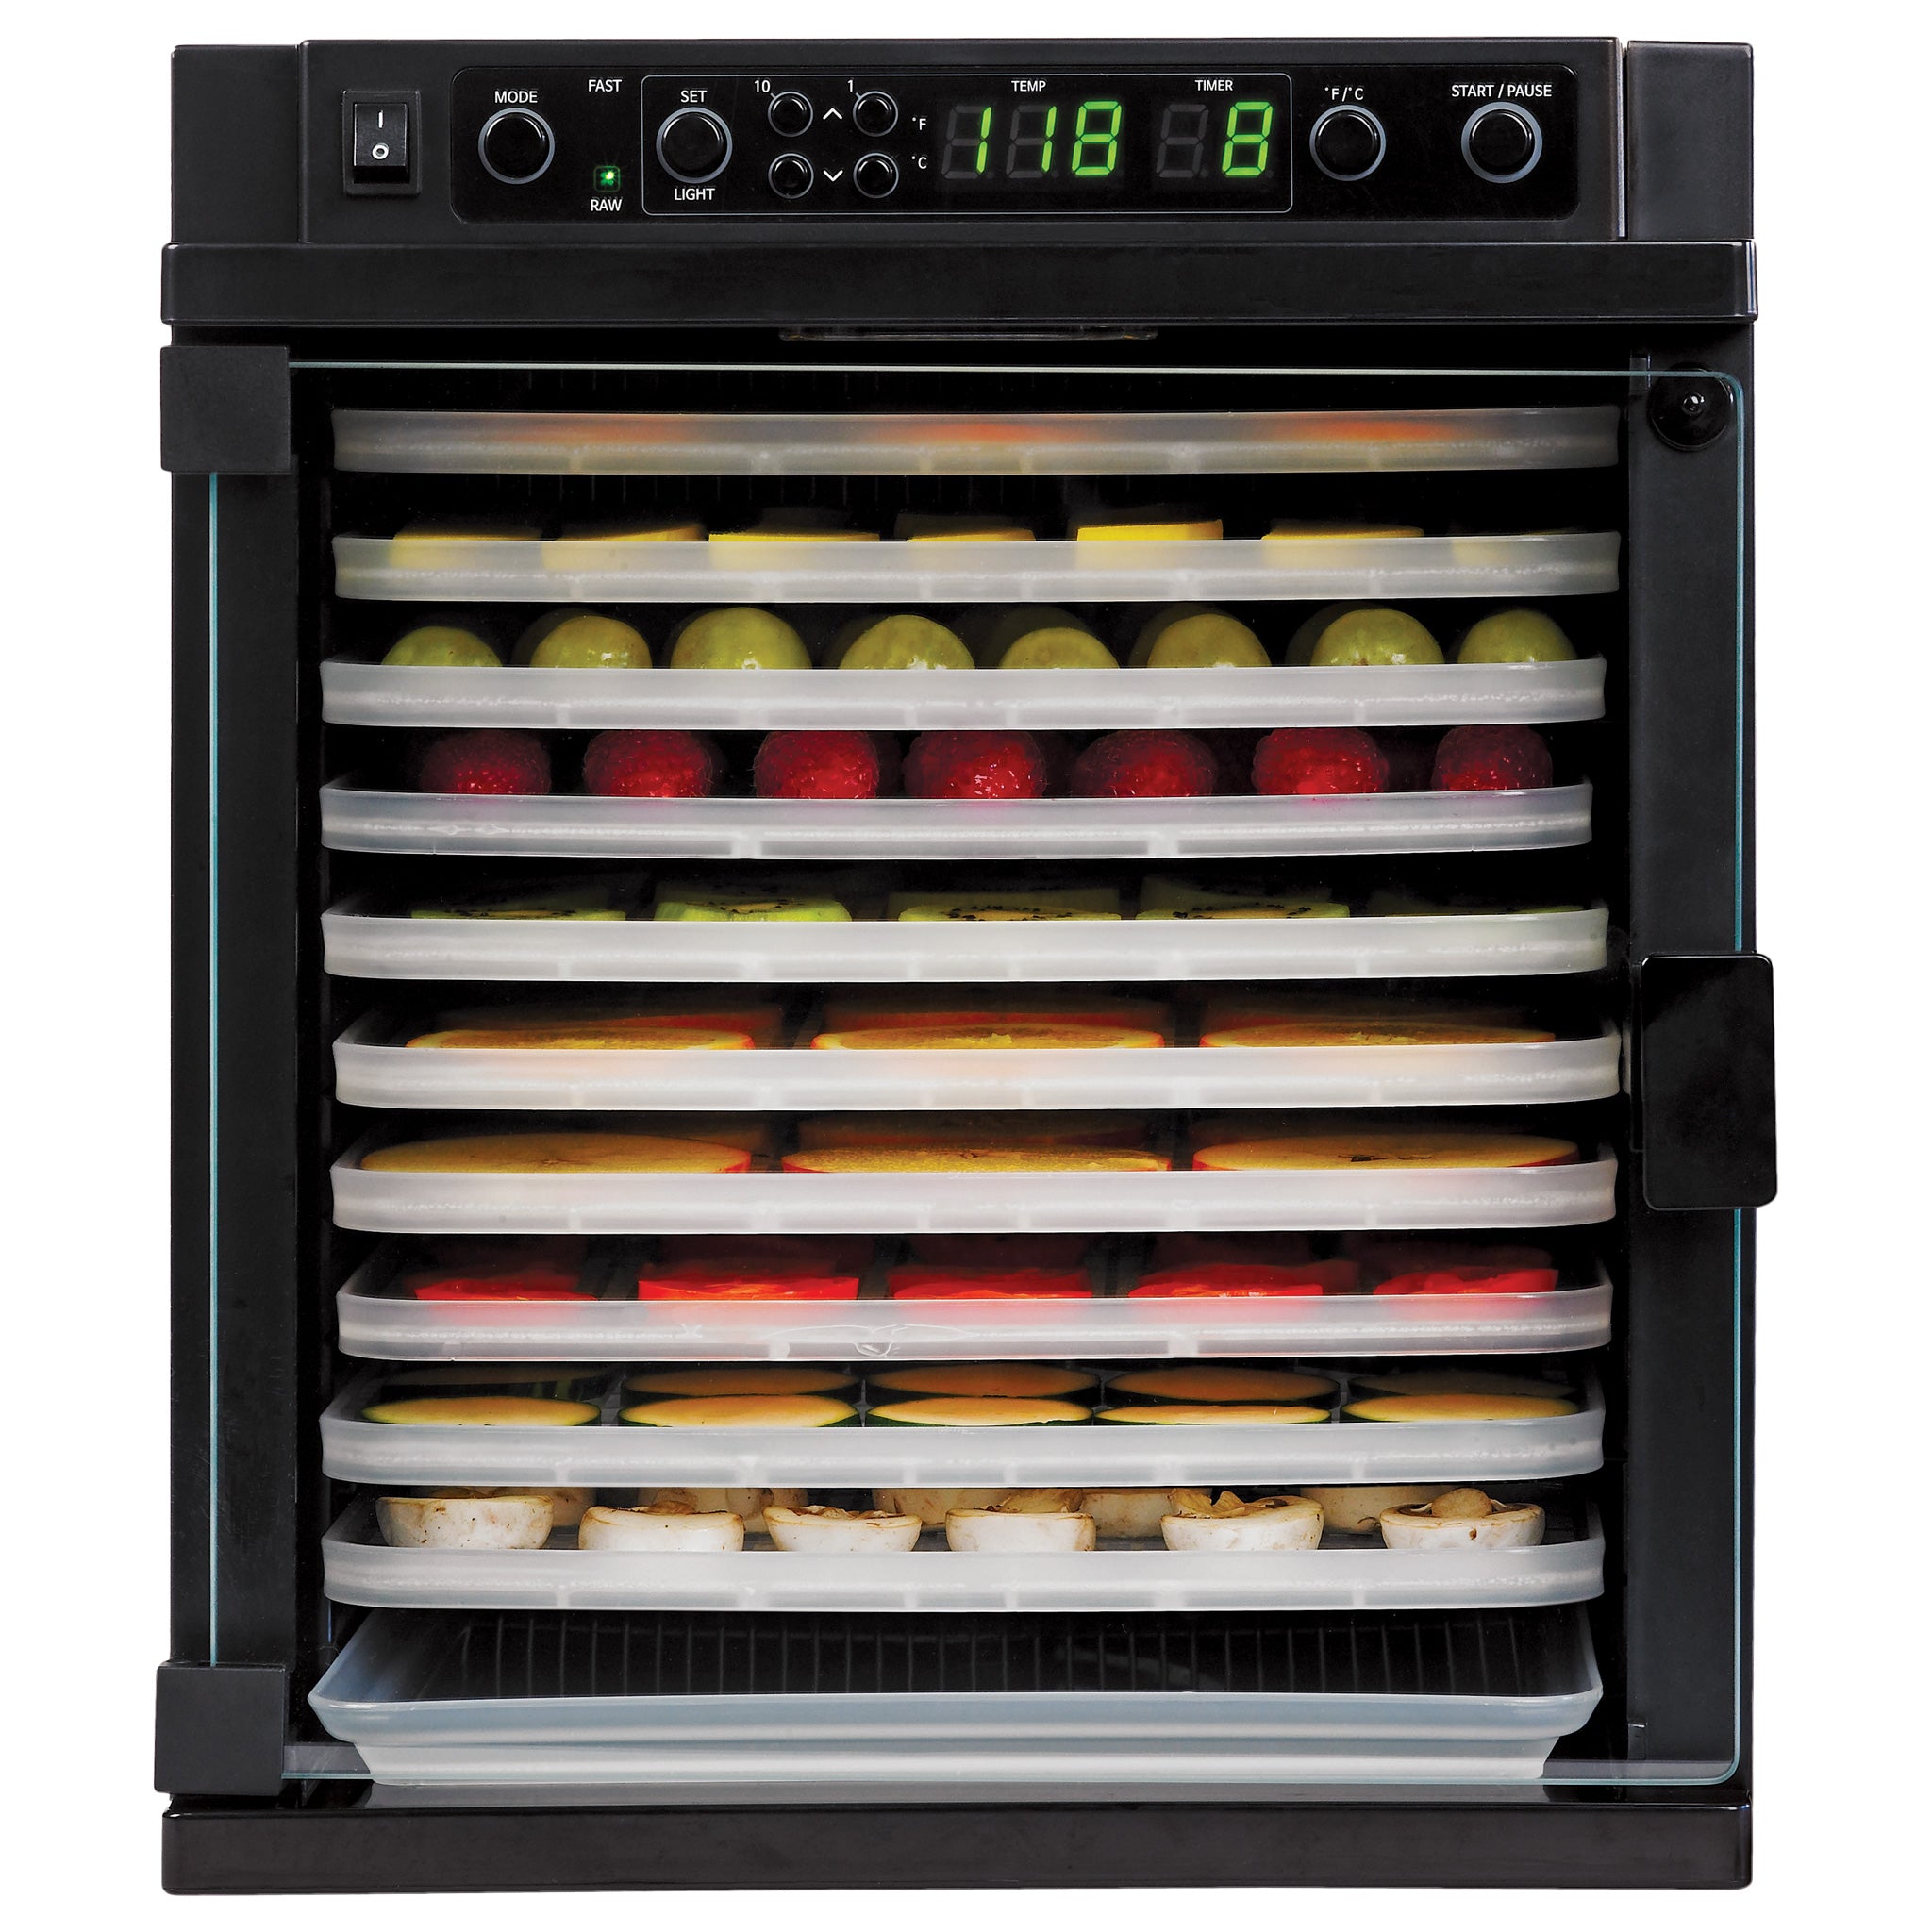 Tribest Sedona Classic Food Dehydrator With Stainless Steel Trays – Black :  Target